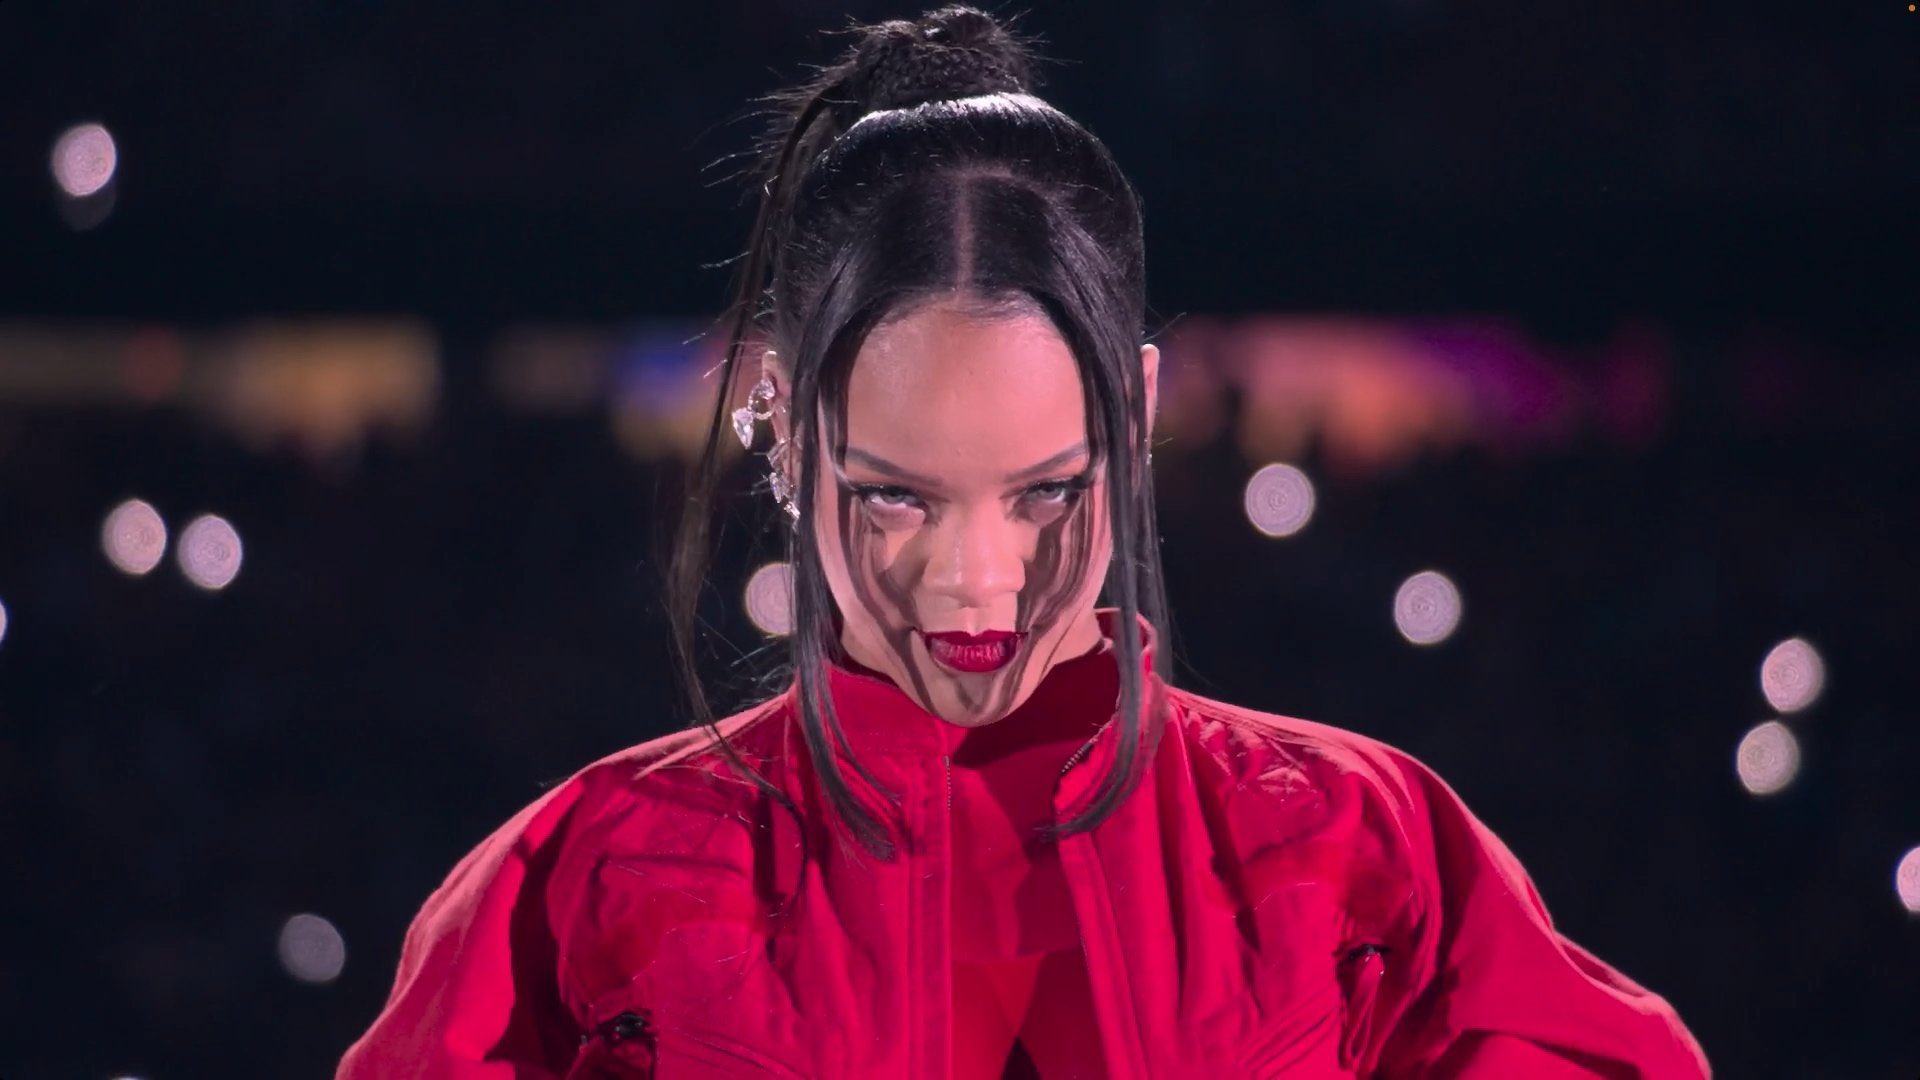 Rihanna Songs Storm Apple Music After Her EPIC Super Bowl Show / Also Occupy 7 of Top 10 Spots on iTunes